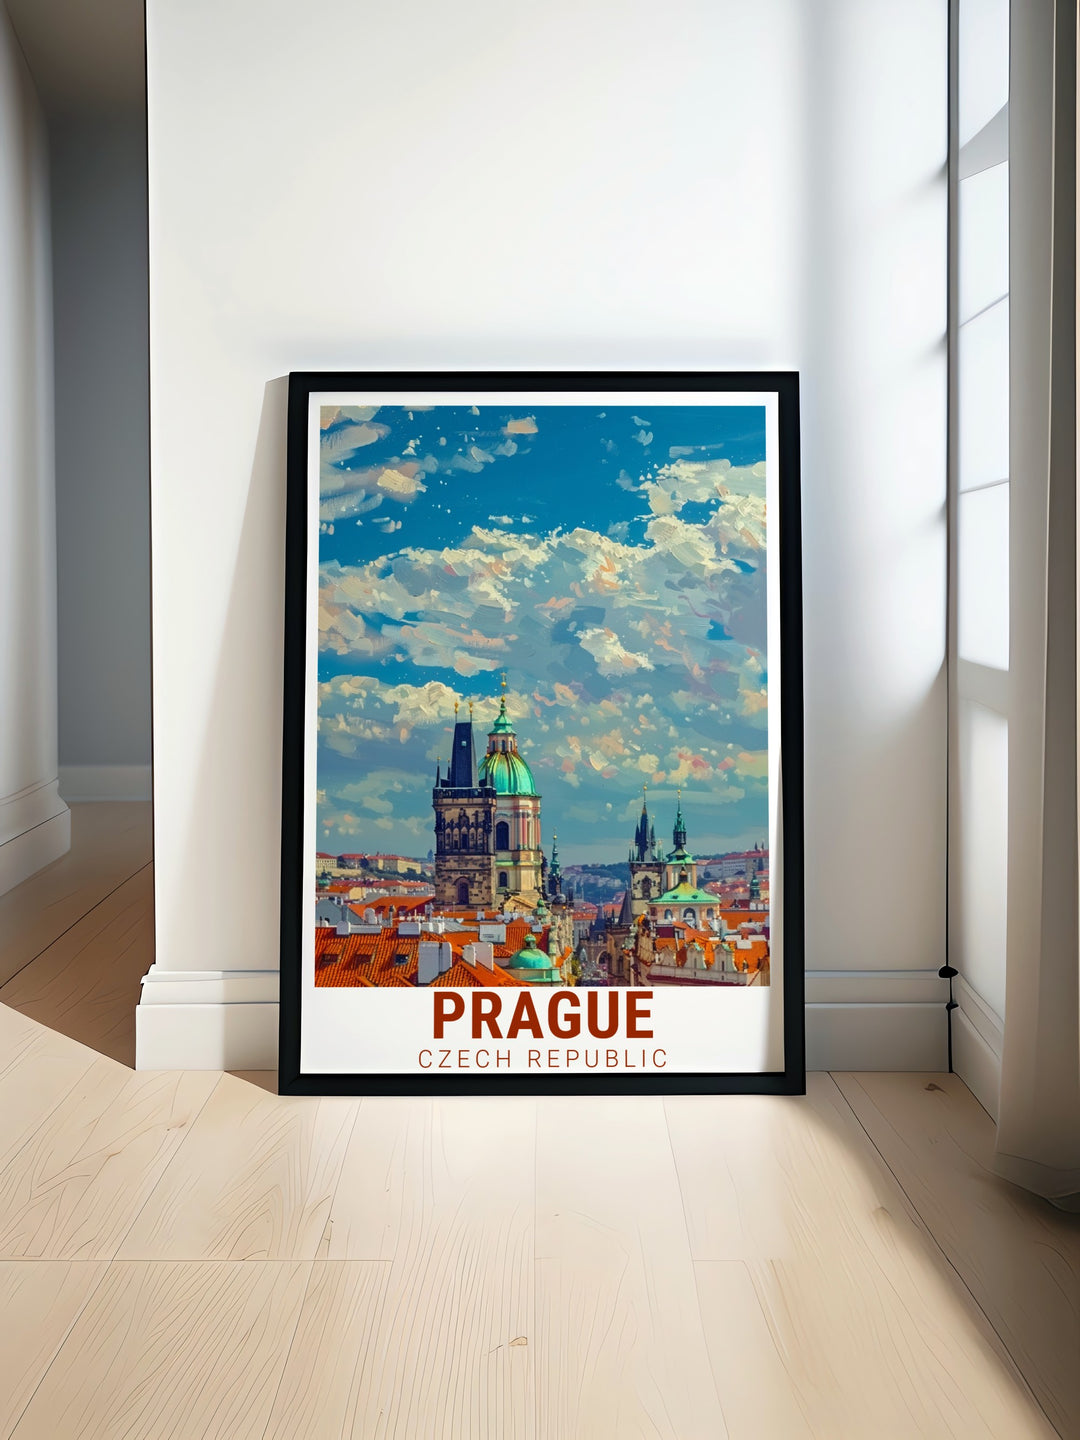 Prague travel poster featuring the iconic Old Town Square showcasing Gothic architecture and rich historical details perfect for home decor and art lovers looking to add a touch of European charm to their living space